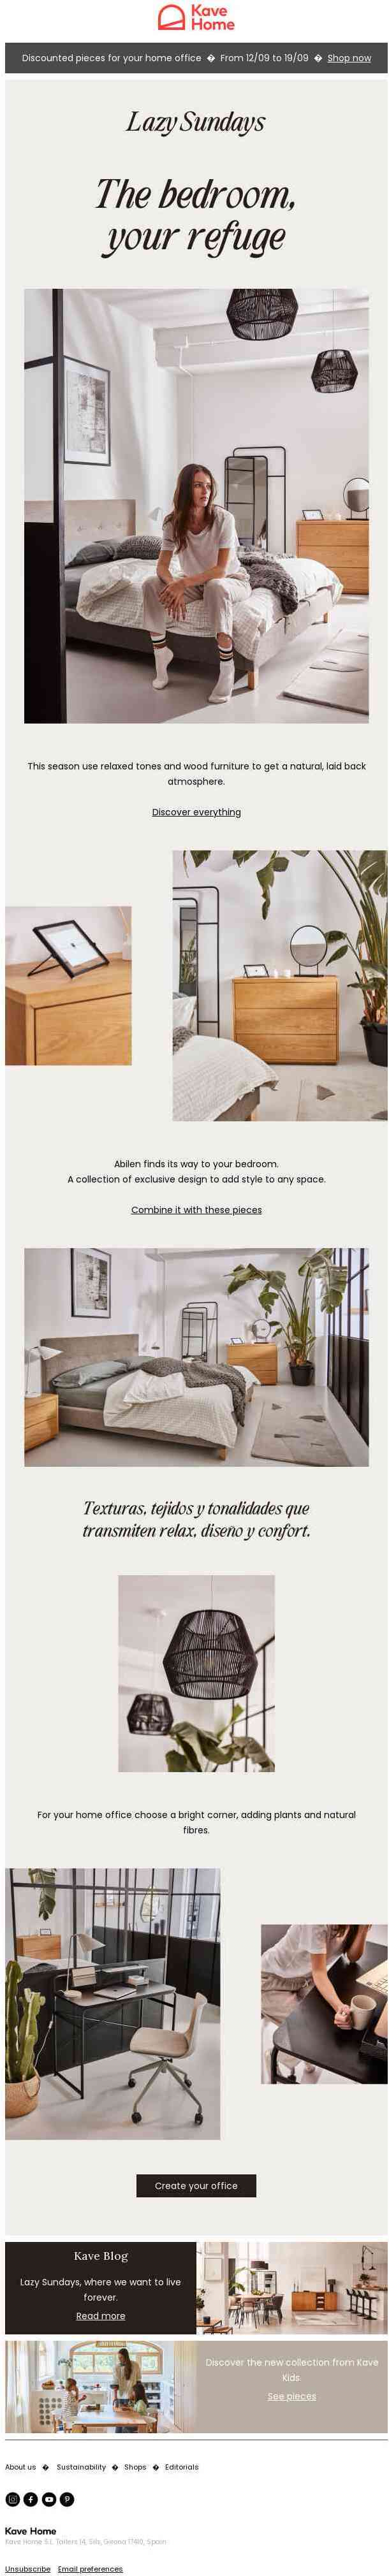 The bedroom, your refuge at home